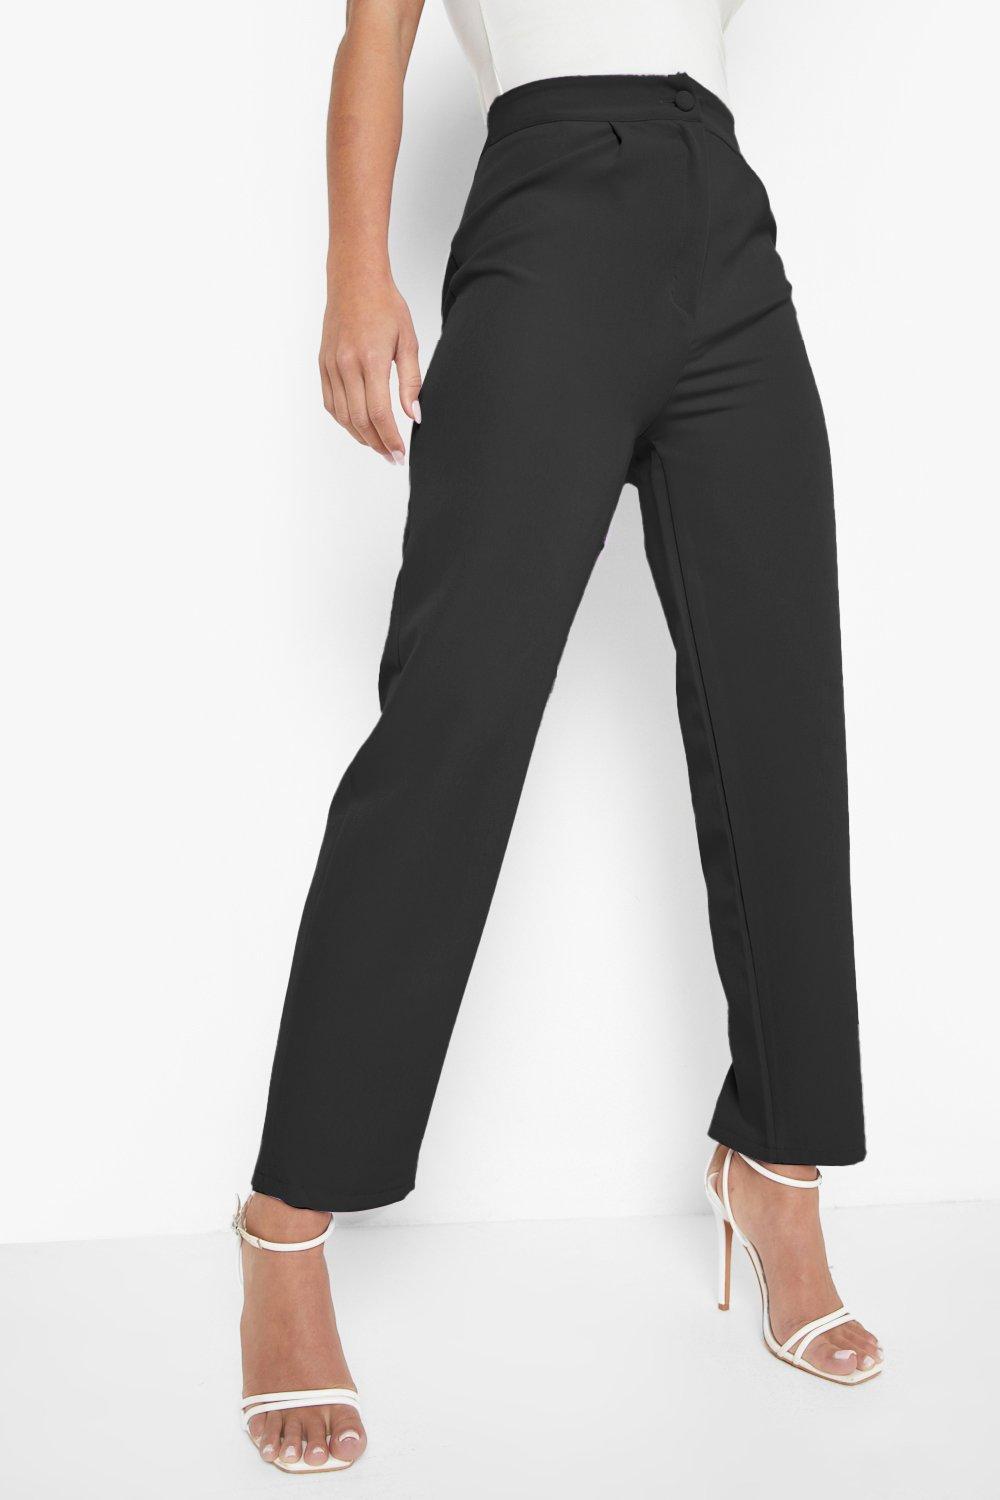 Womens Clothing Trousers Slacks and Chinos Harem pants Boohoo Synthetic Plus Pleat Front Pants in Black 